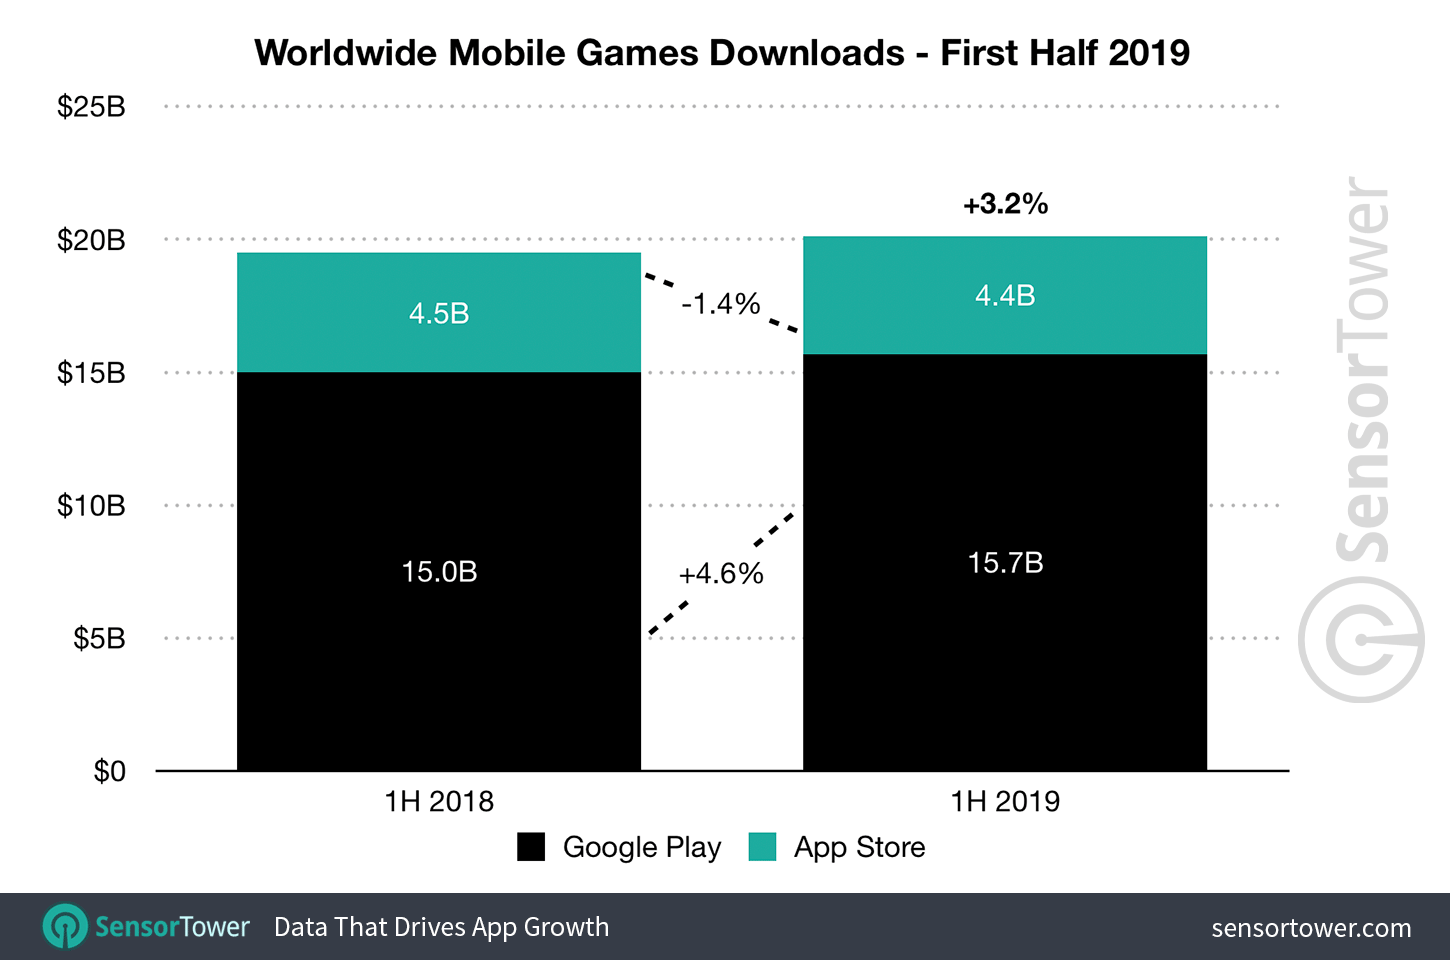 1h-2019-game-downloads-worldwide.png